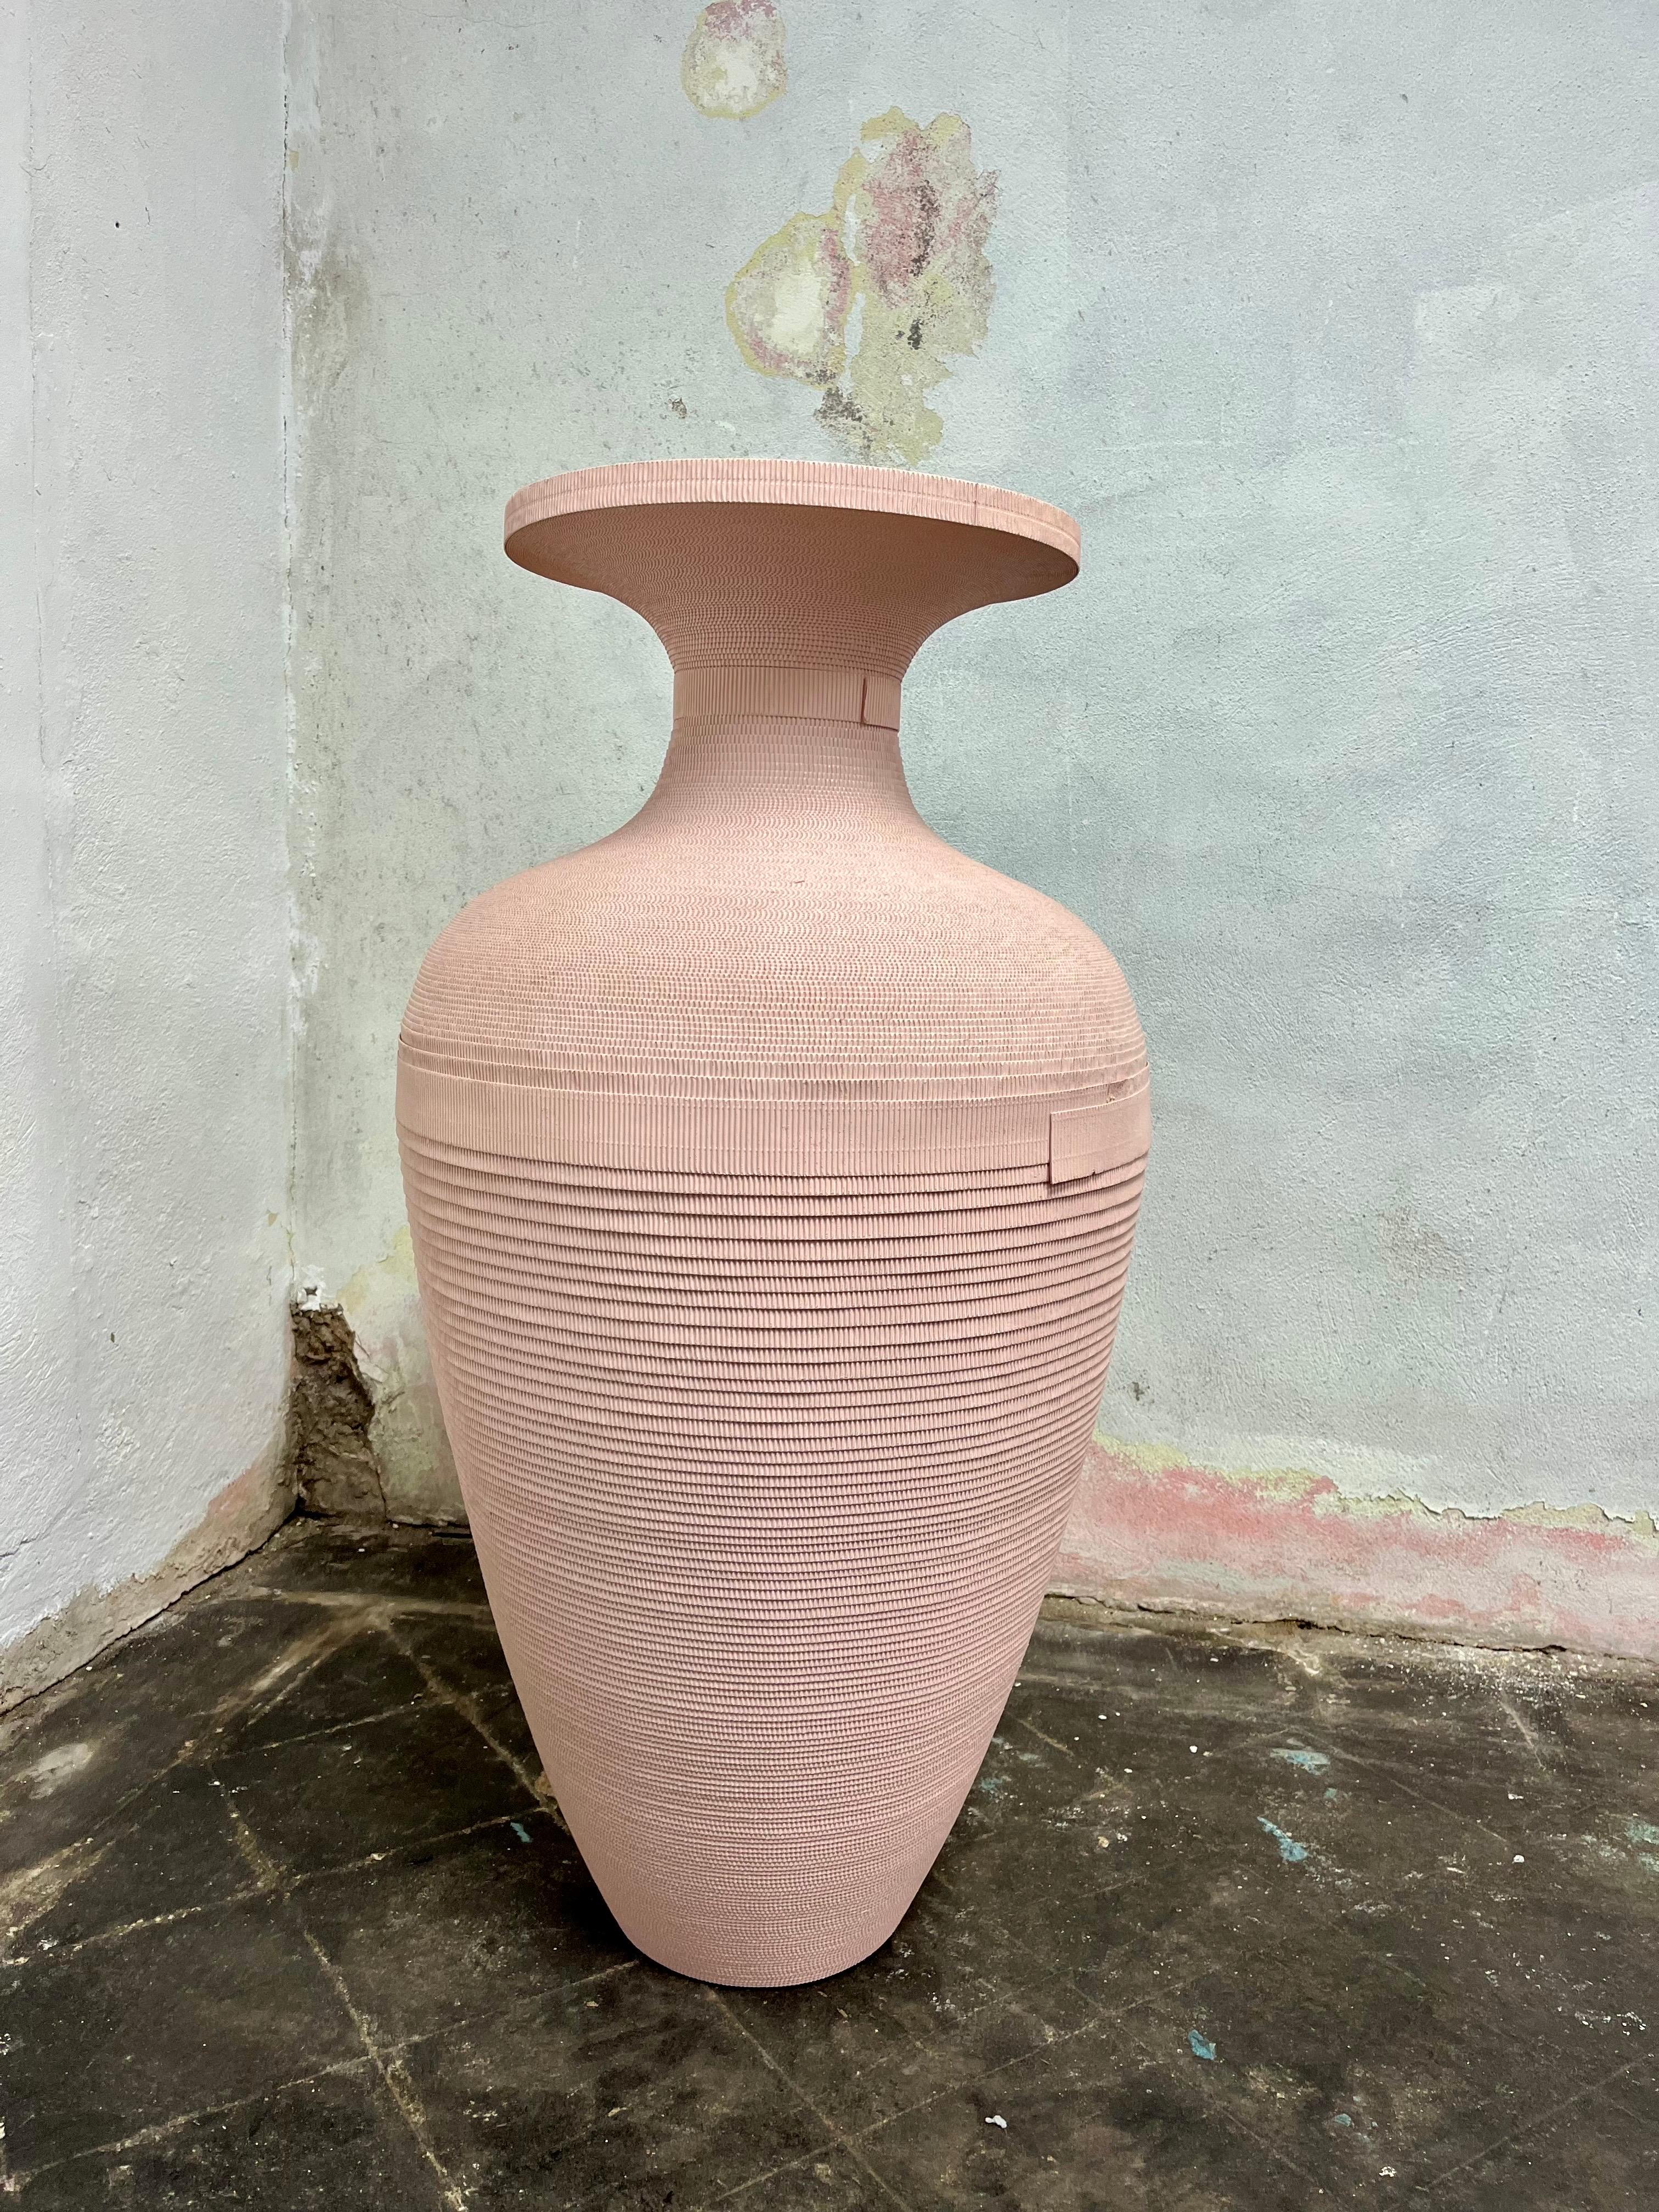 Exceptional Postmodern floor vase by Flute Chicago. Soft mauve or pink color. Nice movement in design with fluted Greek influence. Large size.
Curbside to NYC/Philly $350